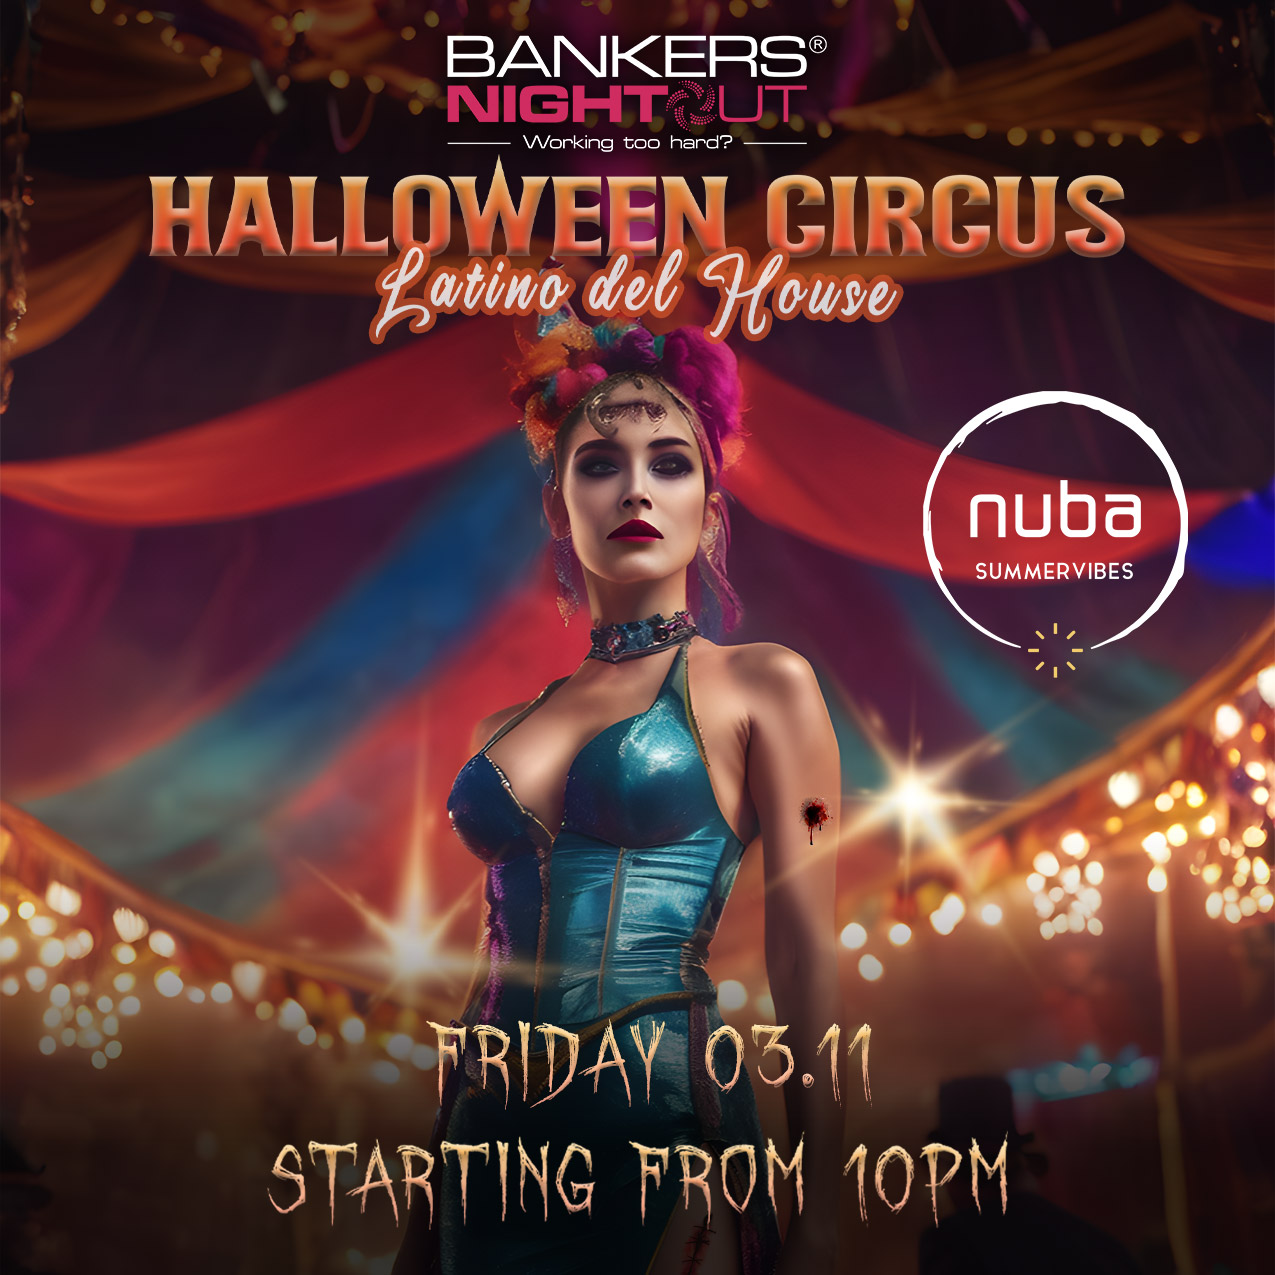 Bankers Night Out - Halloween Circus 2023! - Do you want to party with your friends from banking?